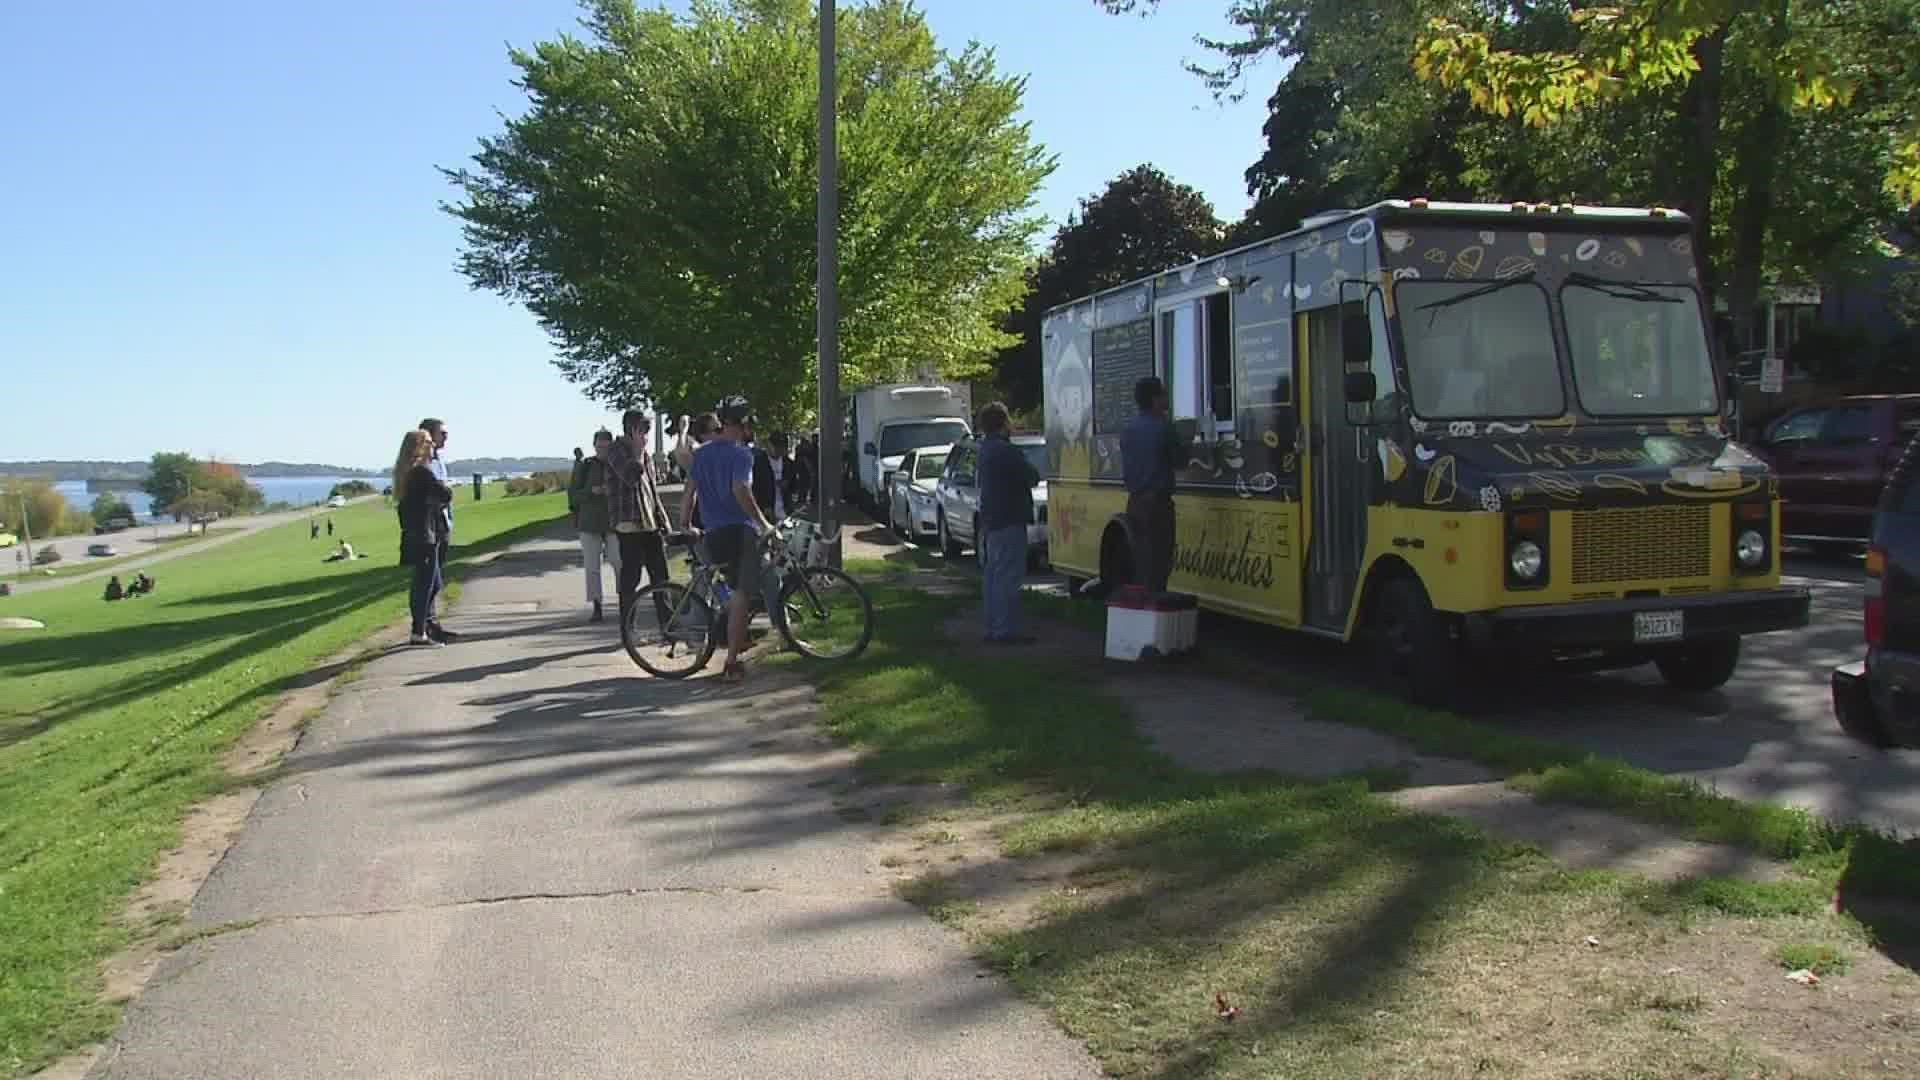 Some options would call for the elimination of as many as 30 street parking spaces and charge license fees to food truck owners of approximately $5,000.